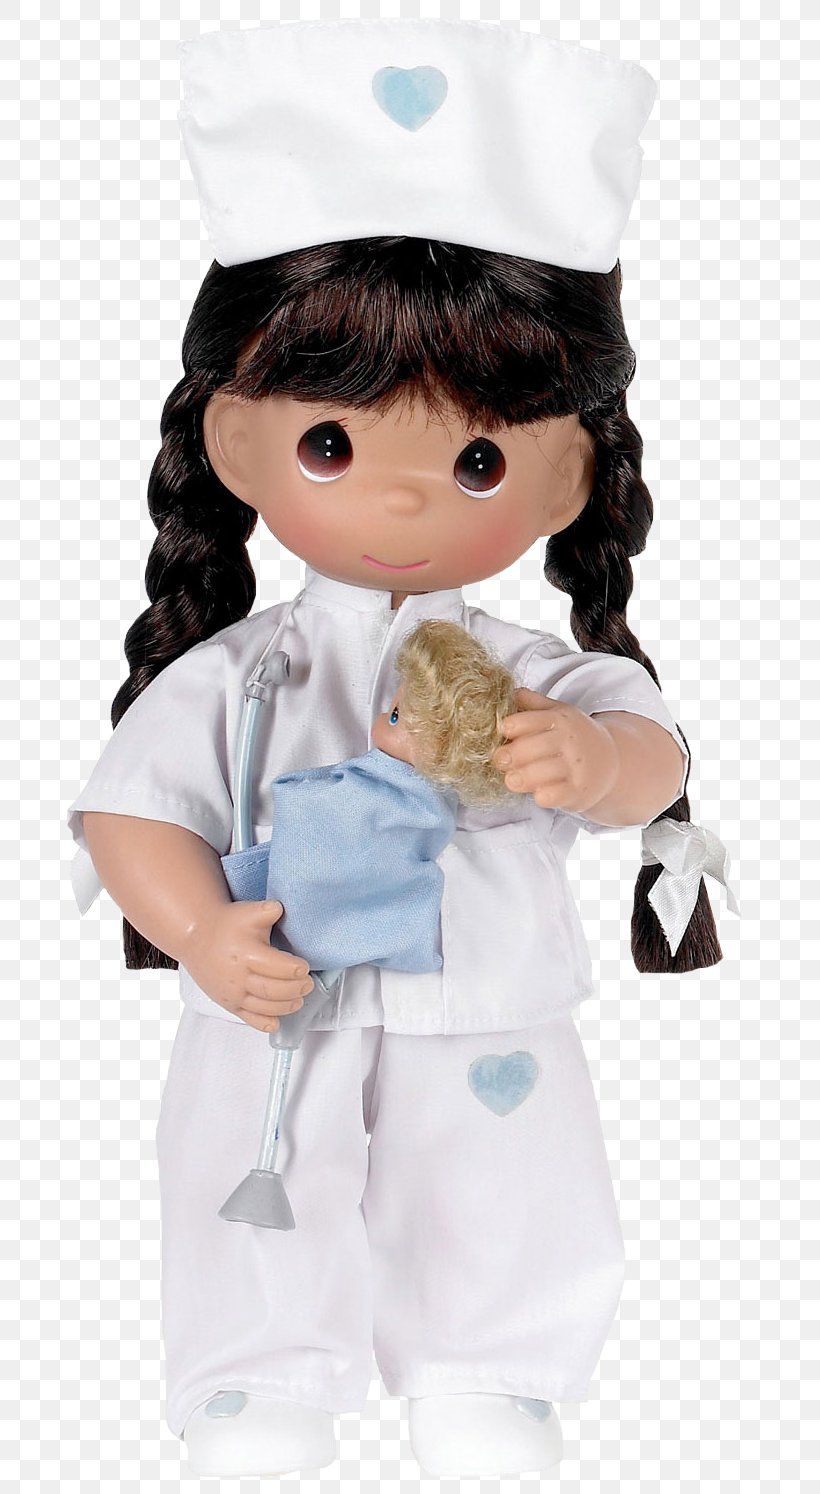 Doll Precious Moments, Inc. Hello Kitty Figurine Puppet Designer, PNG, 692x1494px, Doll, Child, Figurine, Health Professional, Hello Kitty Download Free